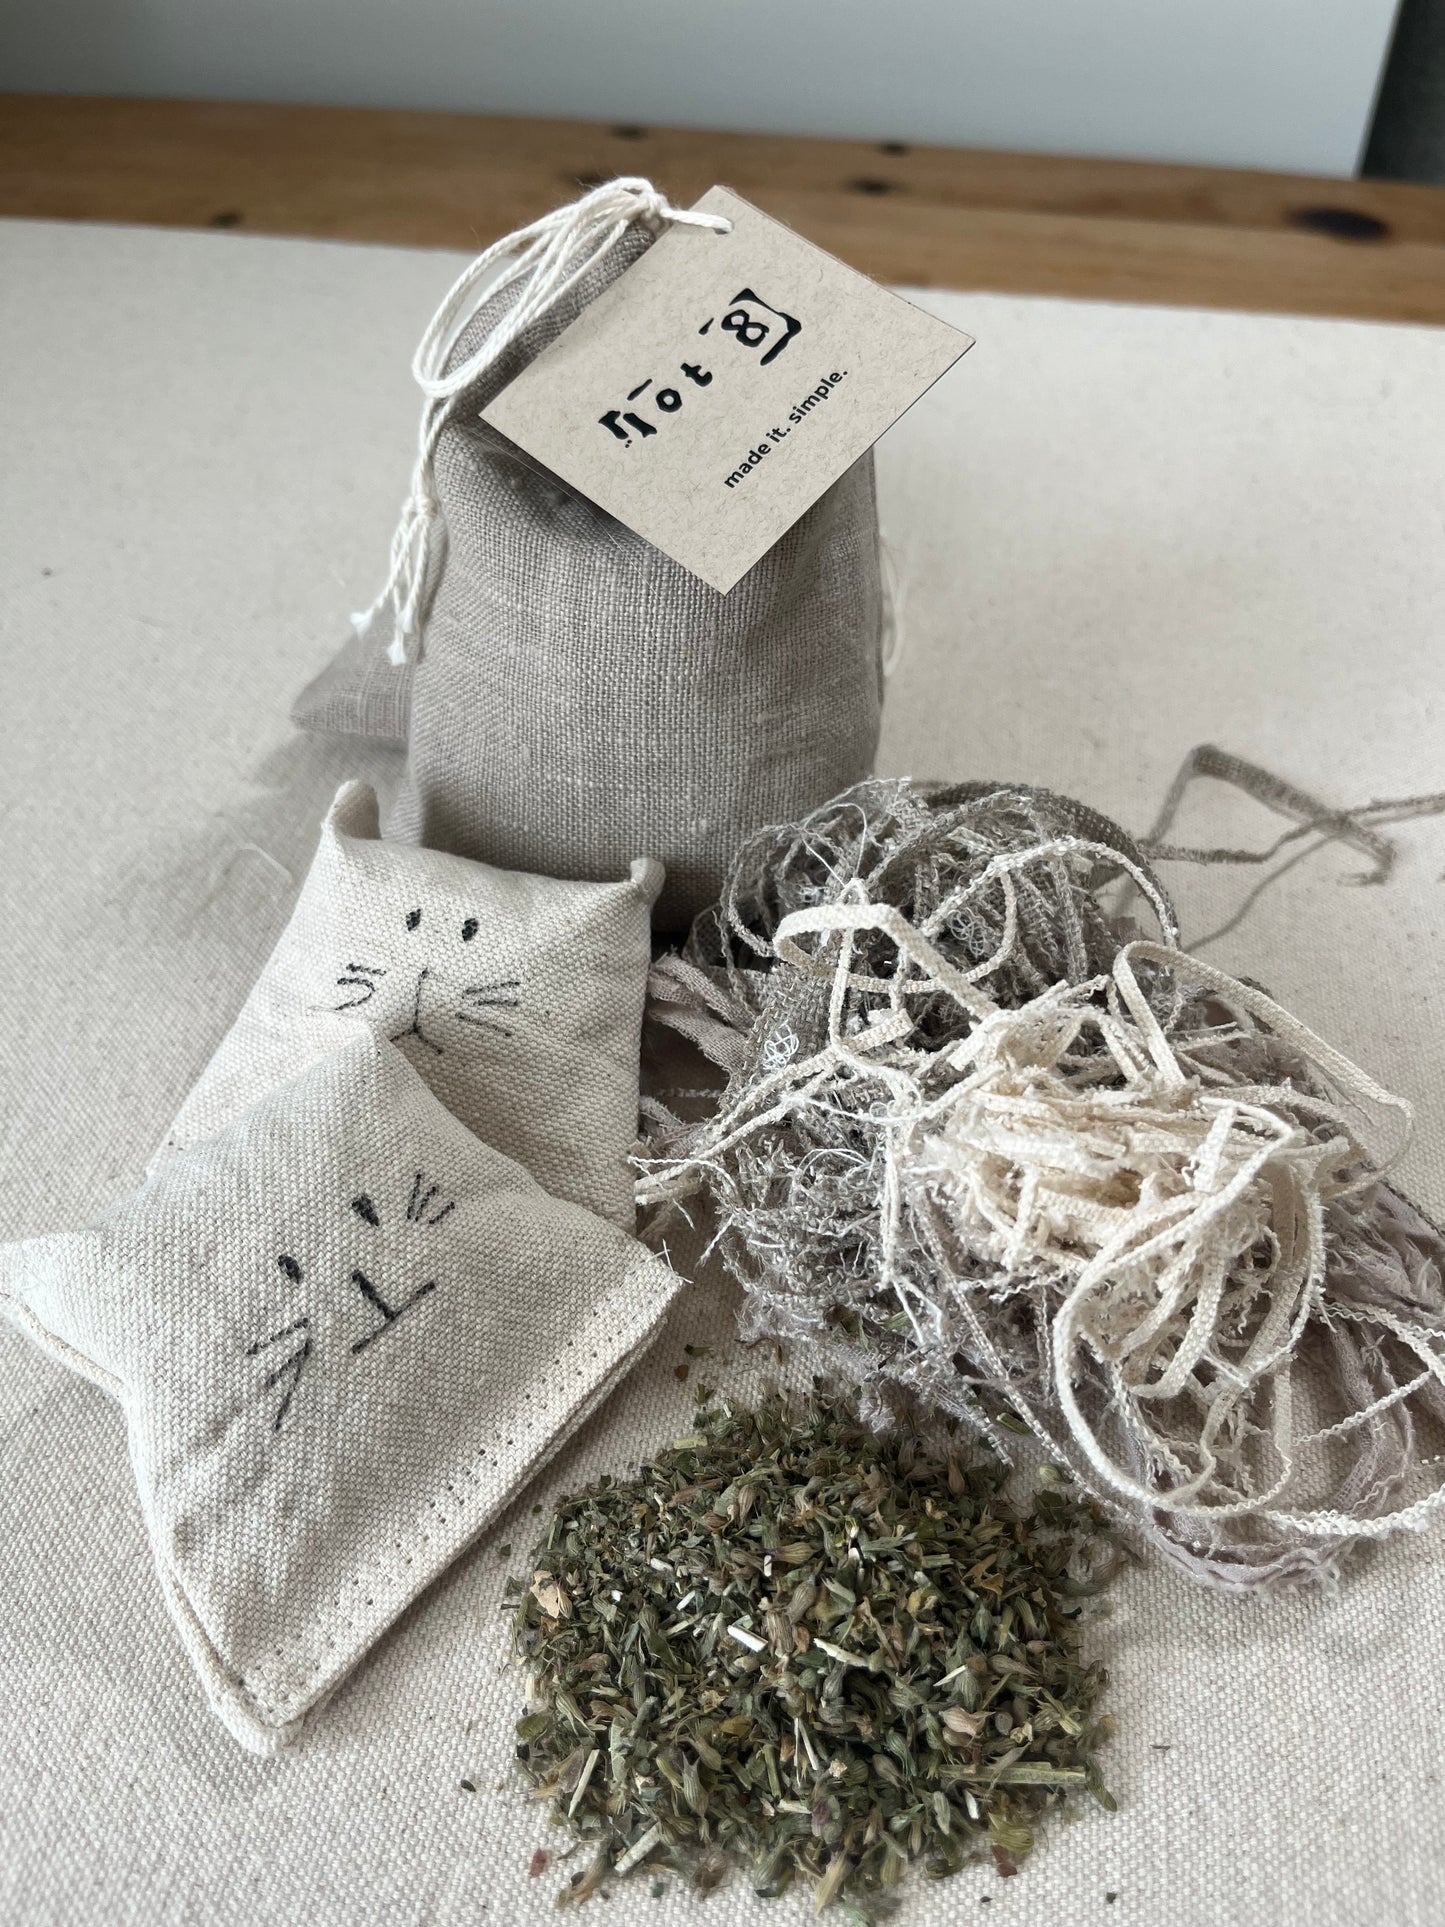 2 natural cat toys with adorable faces lay on a table. Beside them are small piles of their filling; a pile of organic cat nip and a pile of natural fabric scraps. Behind them sits a linen pouch filled with cat grass seeds.